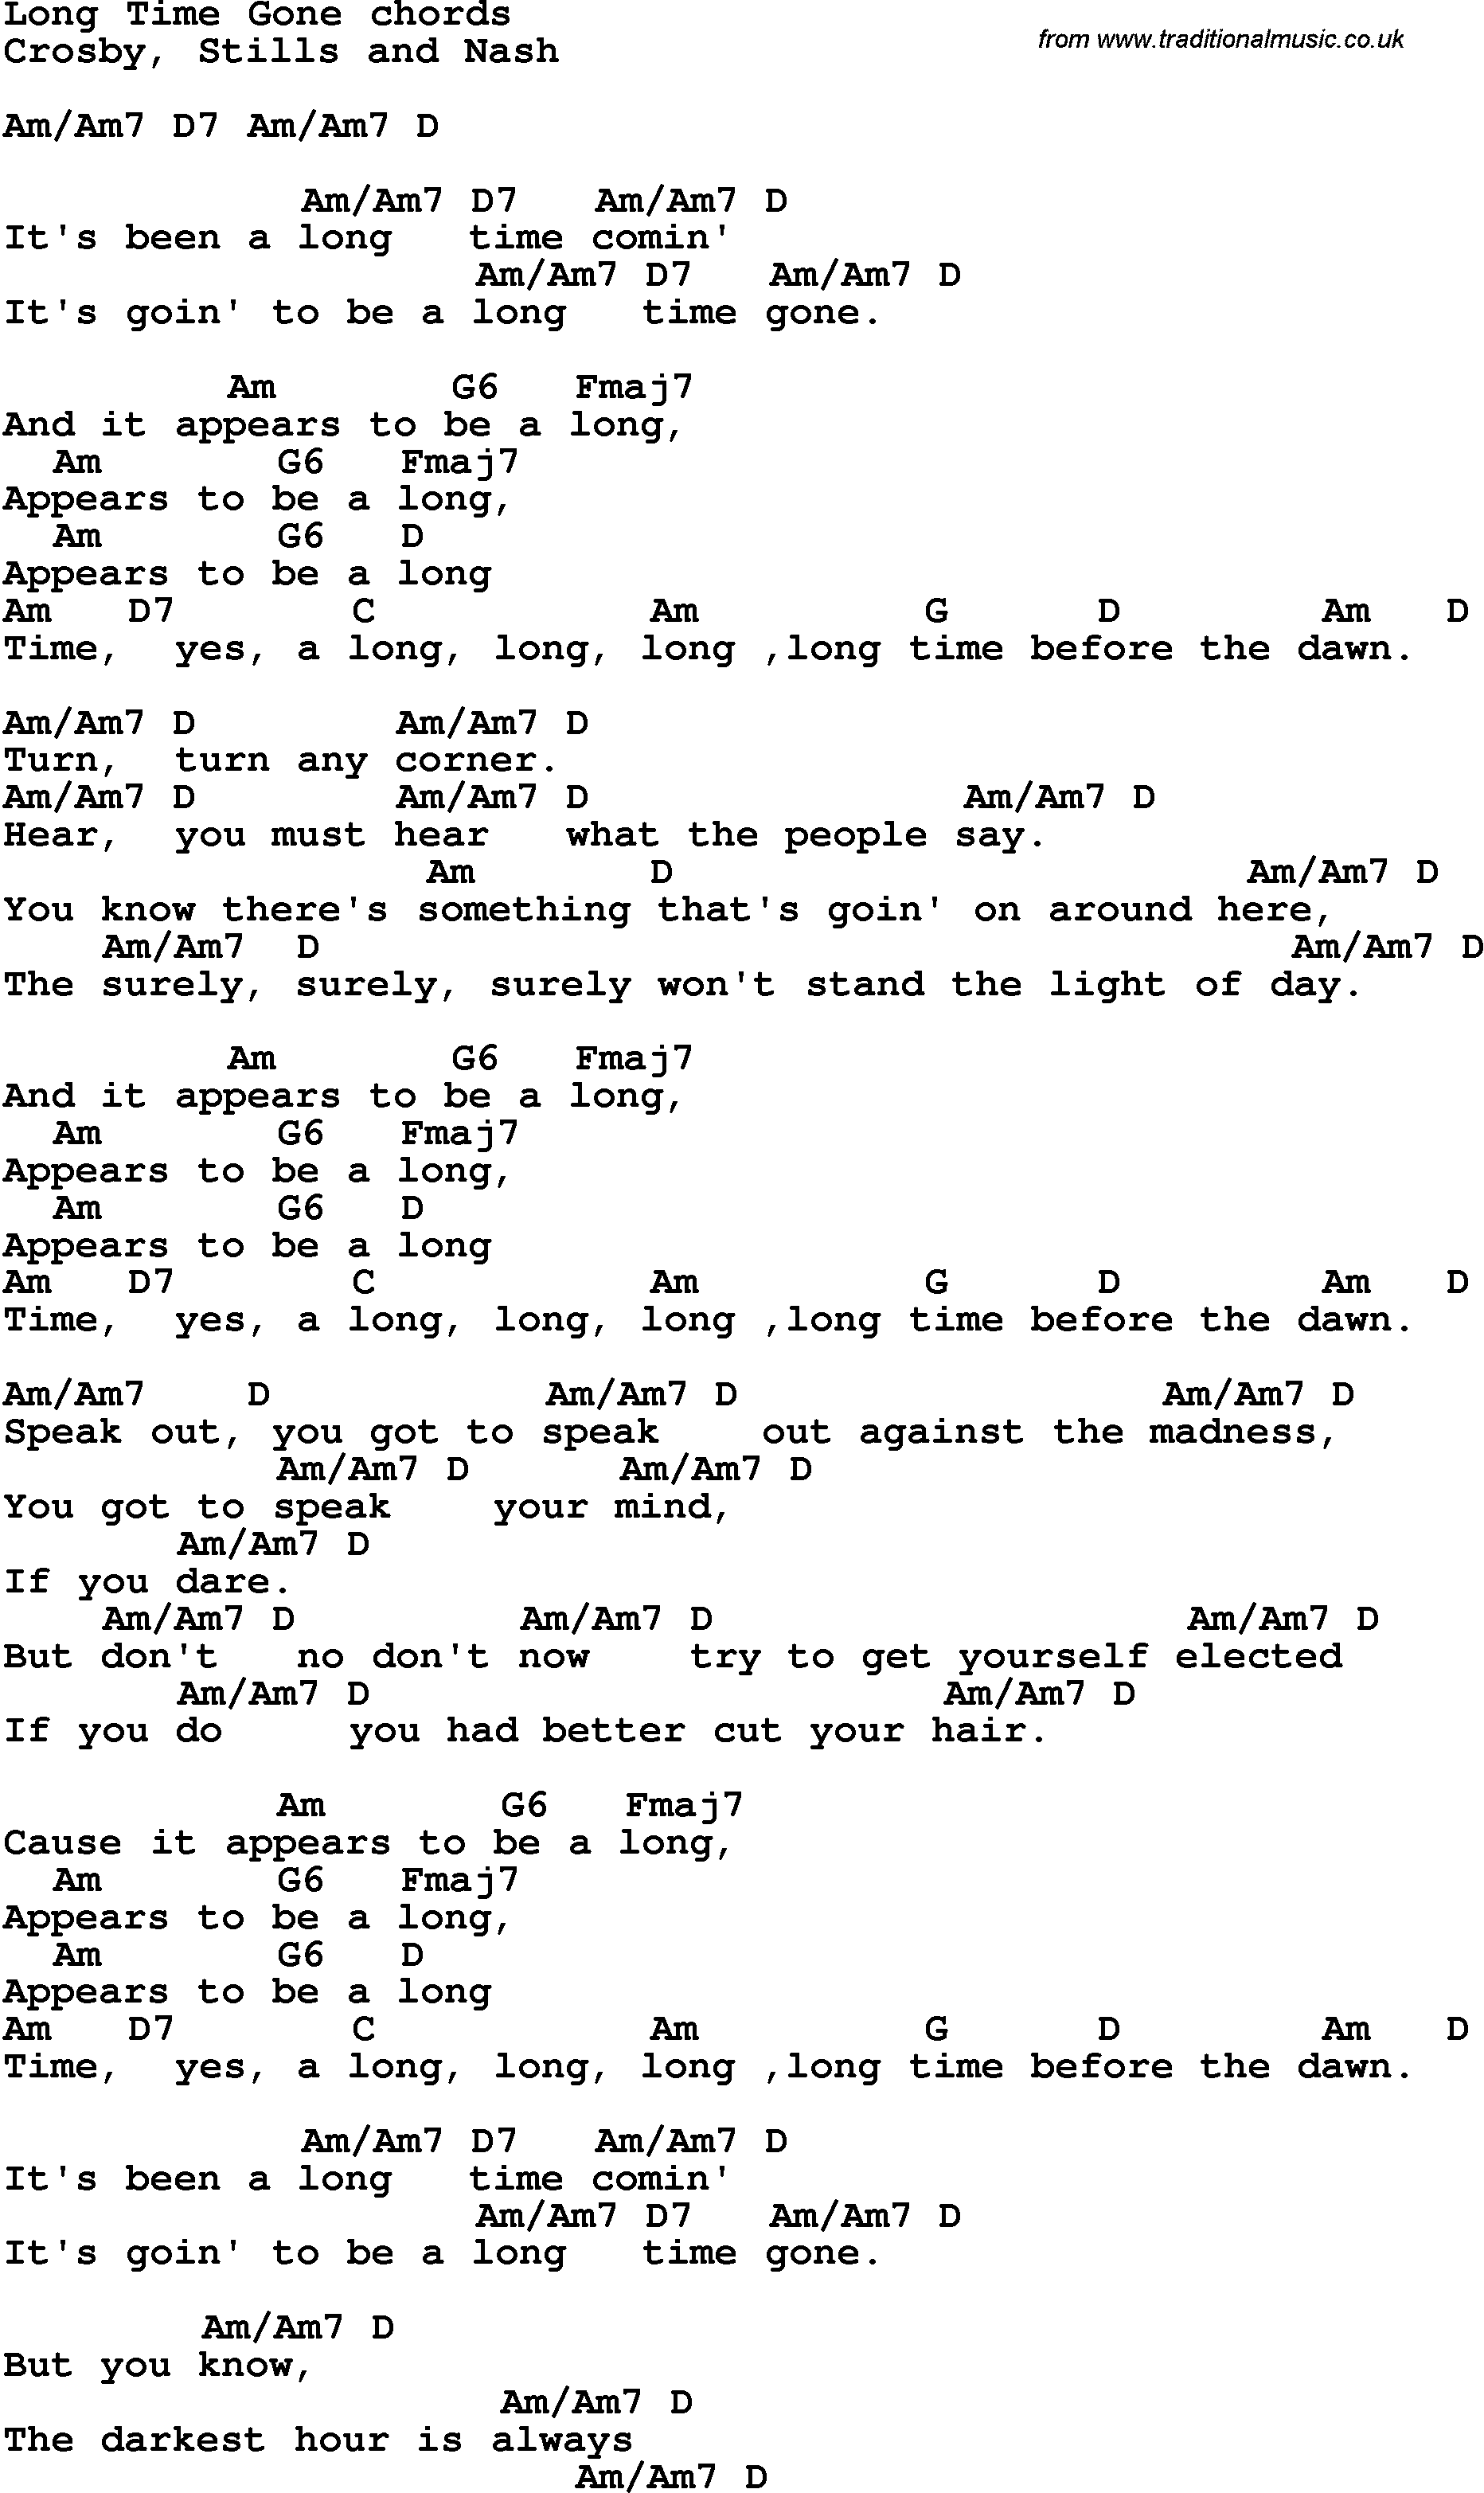 Song Lyrics with guitar chords for Long Time Gone